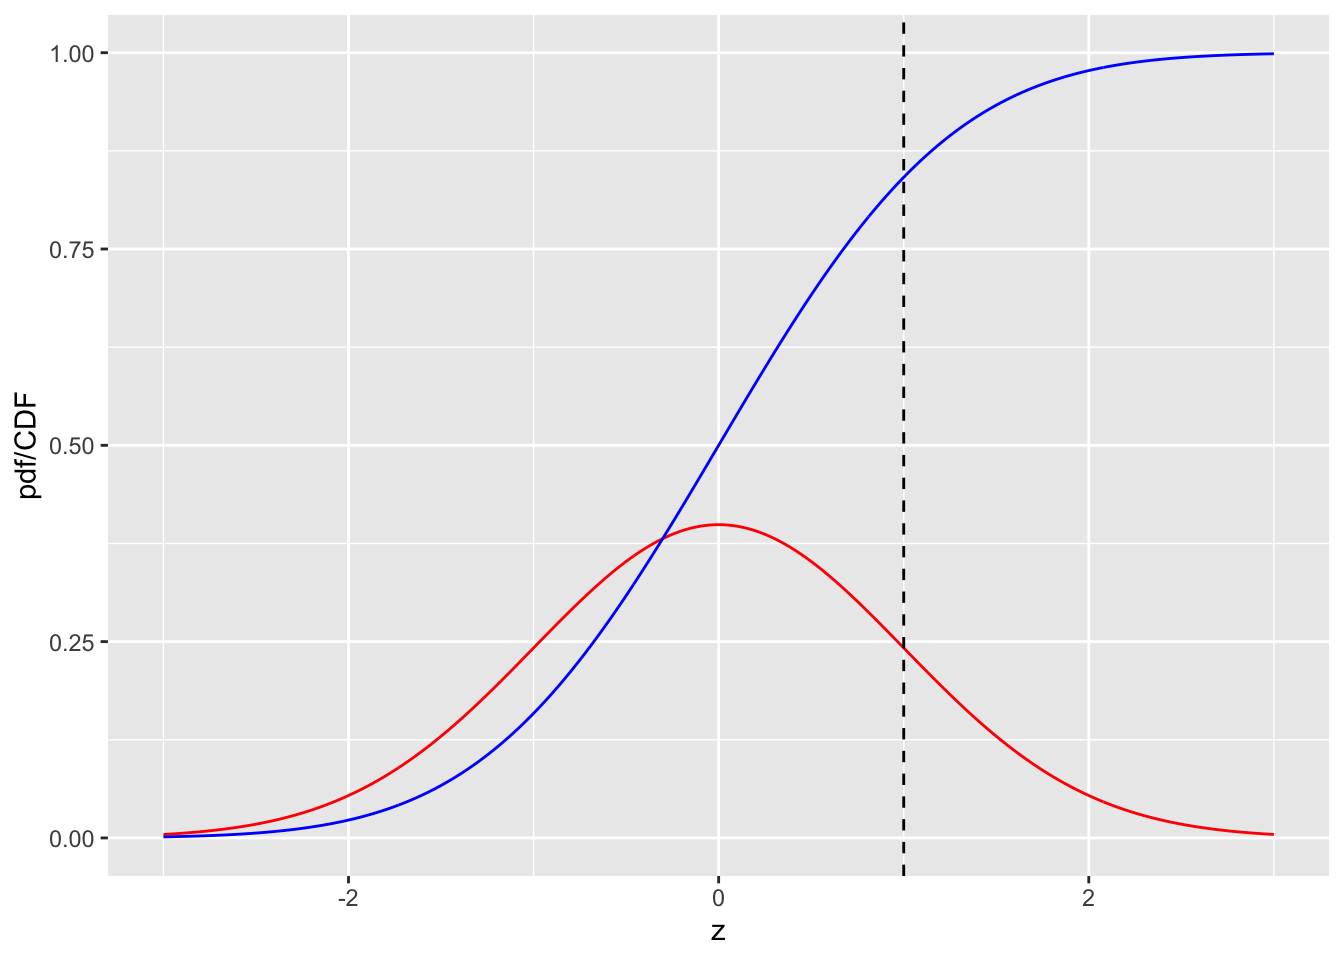 pdf-CDF plots for the unit normal distribution. The red curve is the pdf and the blue line is the CDF. The dashed line is the reporting threshold $\zeta = 1$.